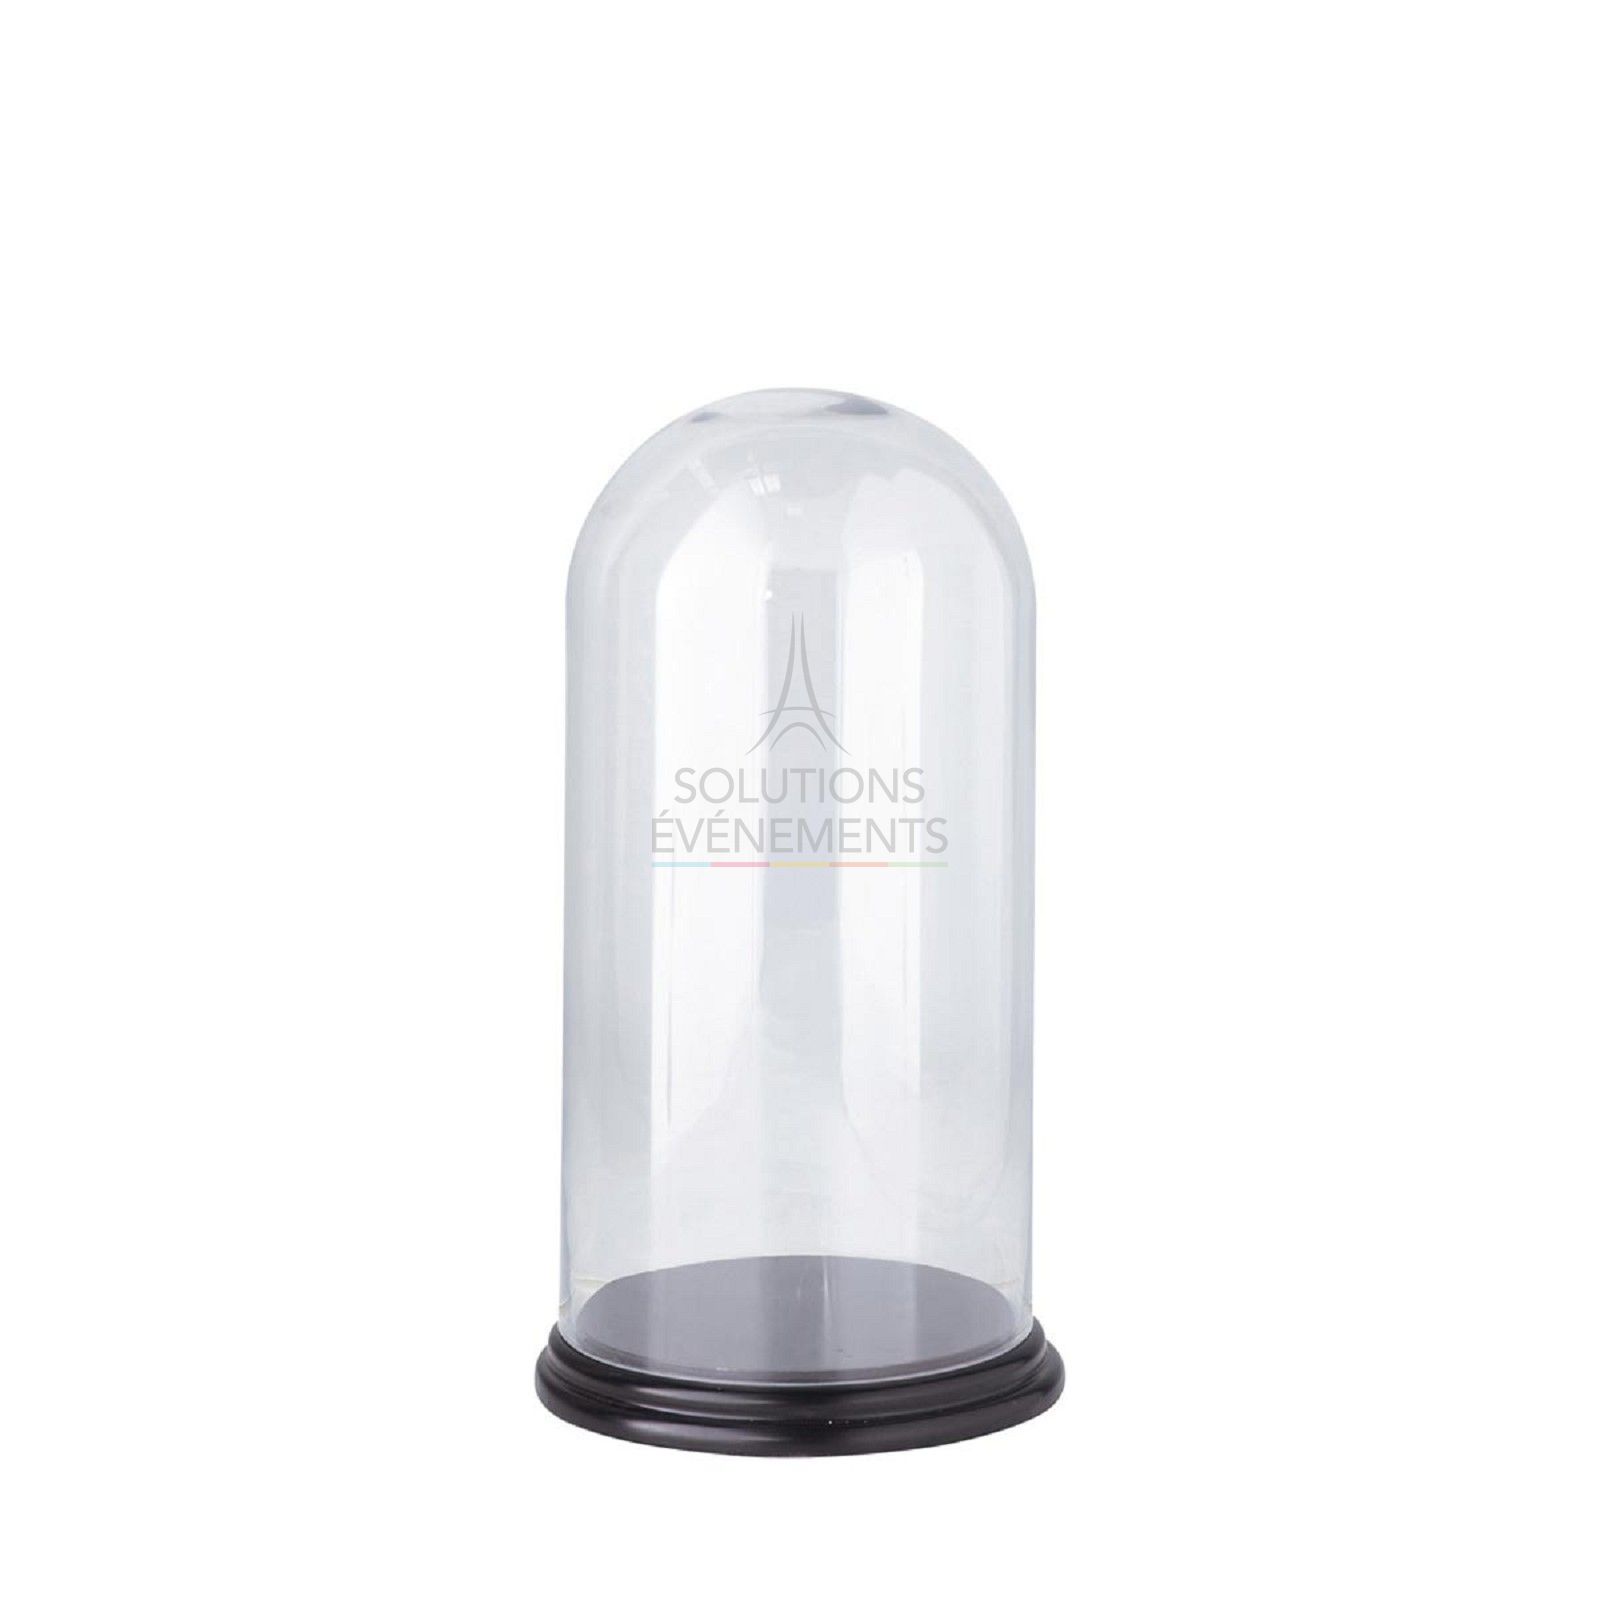 Rental of glass bell, black base to display your products